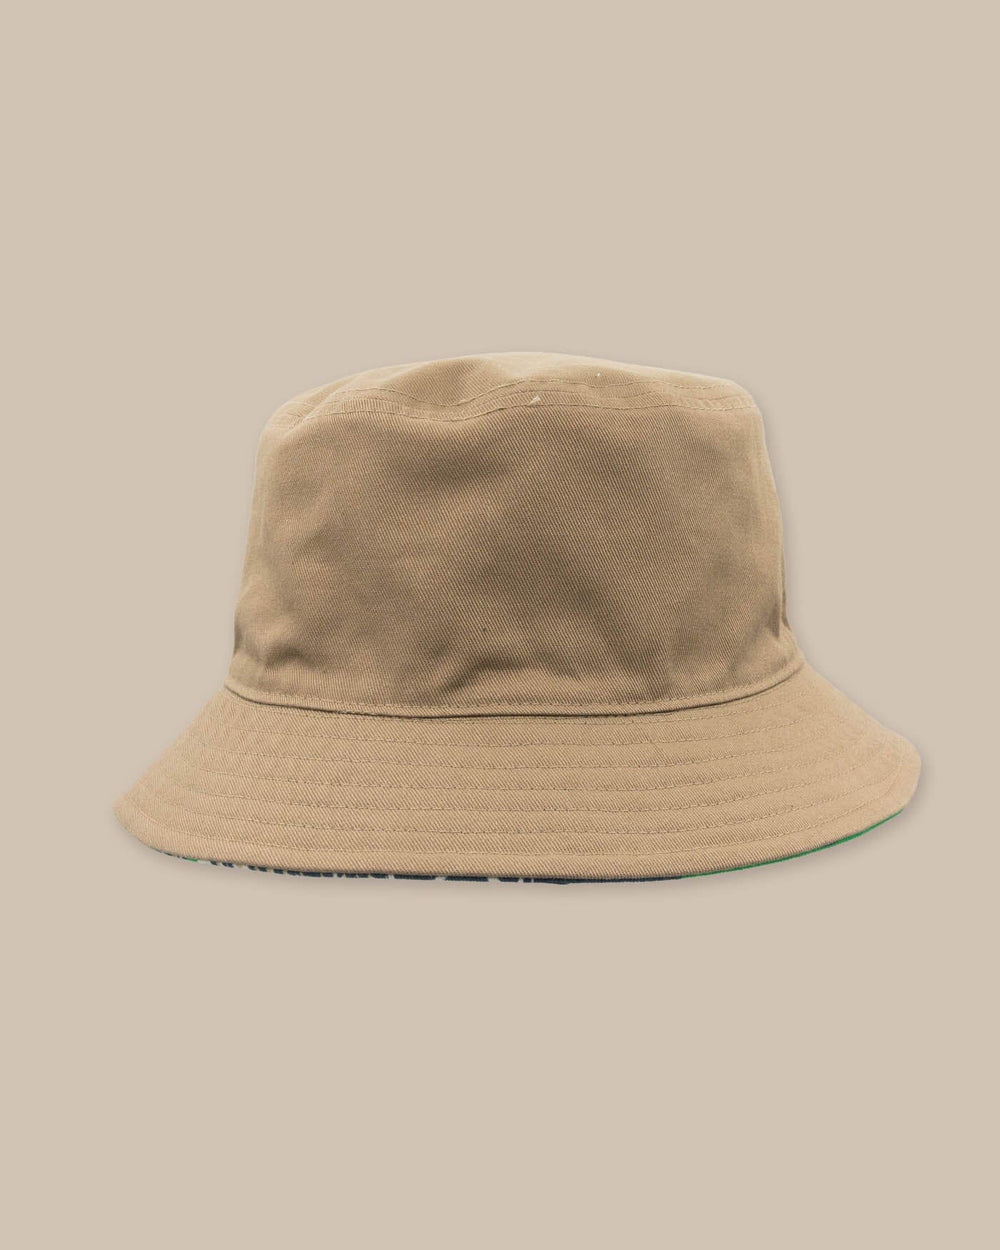 The back view of the Southern Tide Beach Blooms Bucket Hat by Southern Tide - Khaki